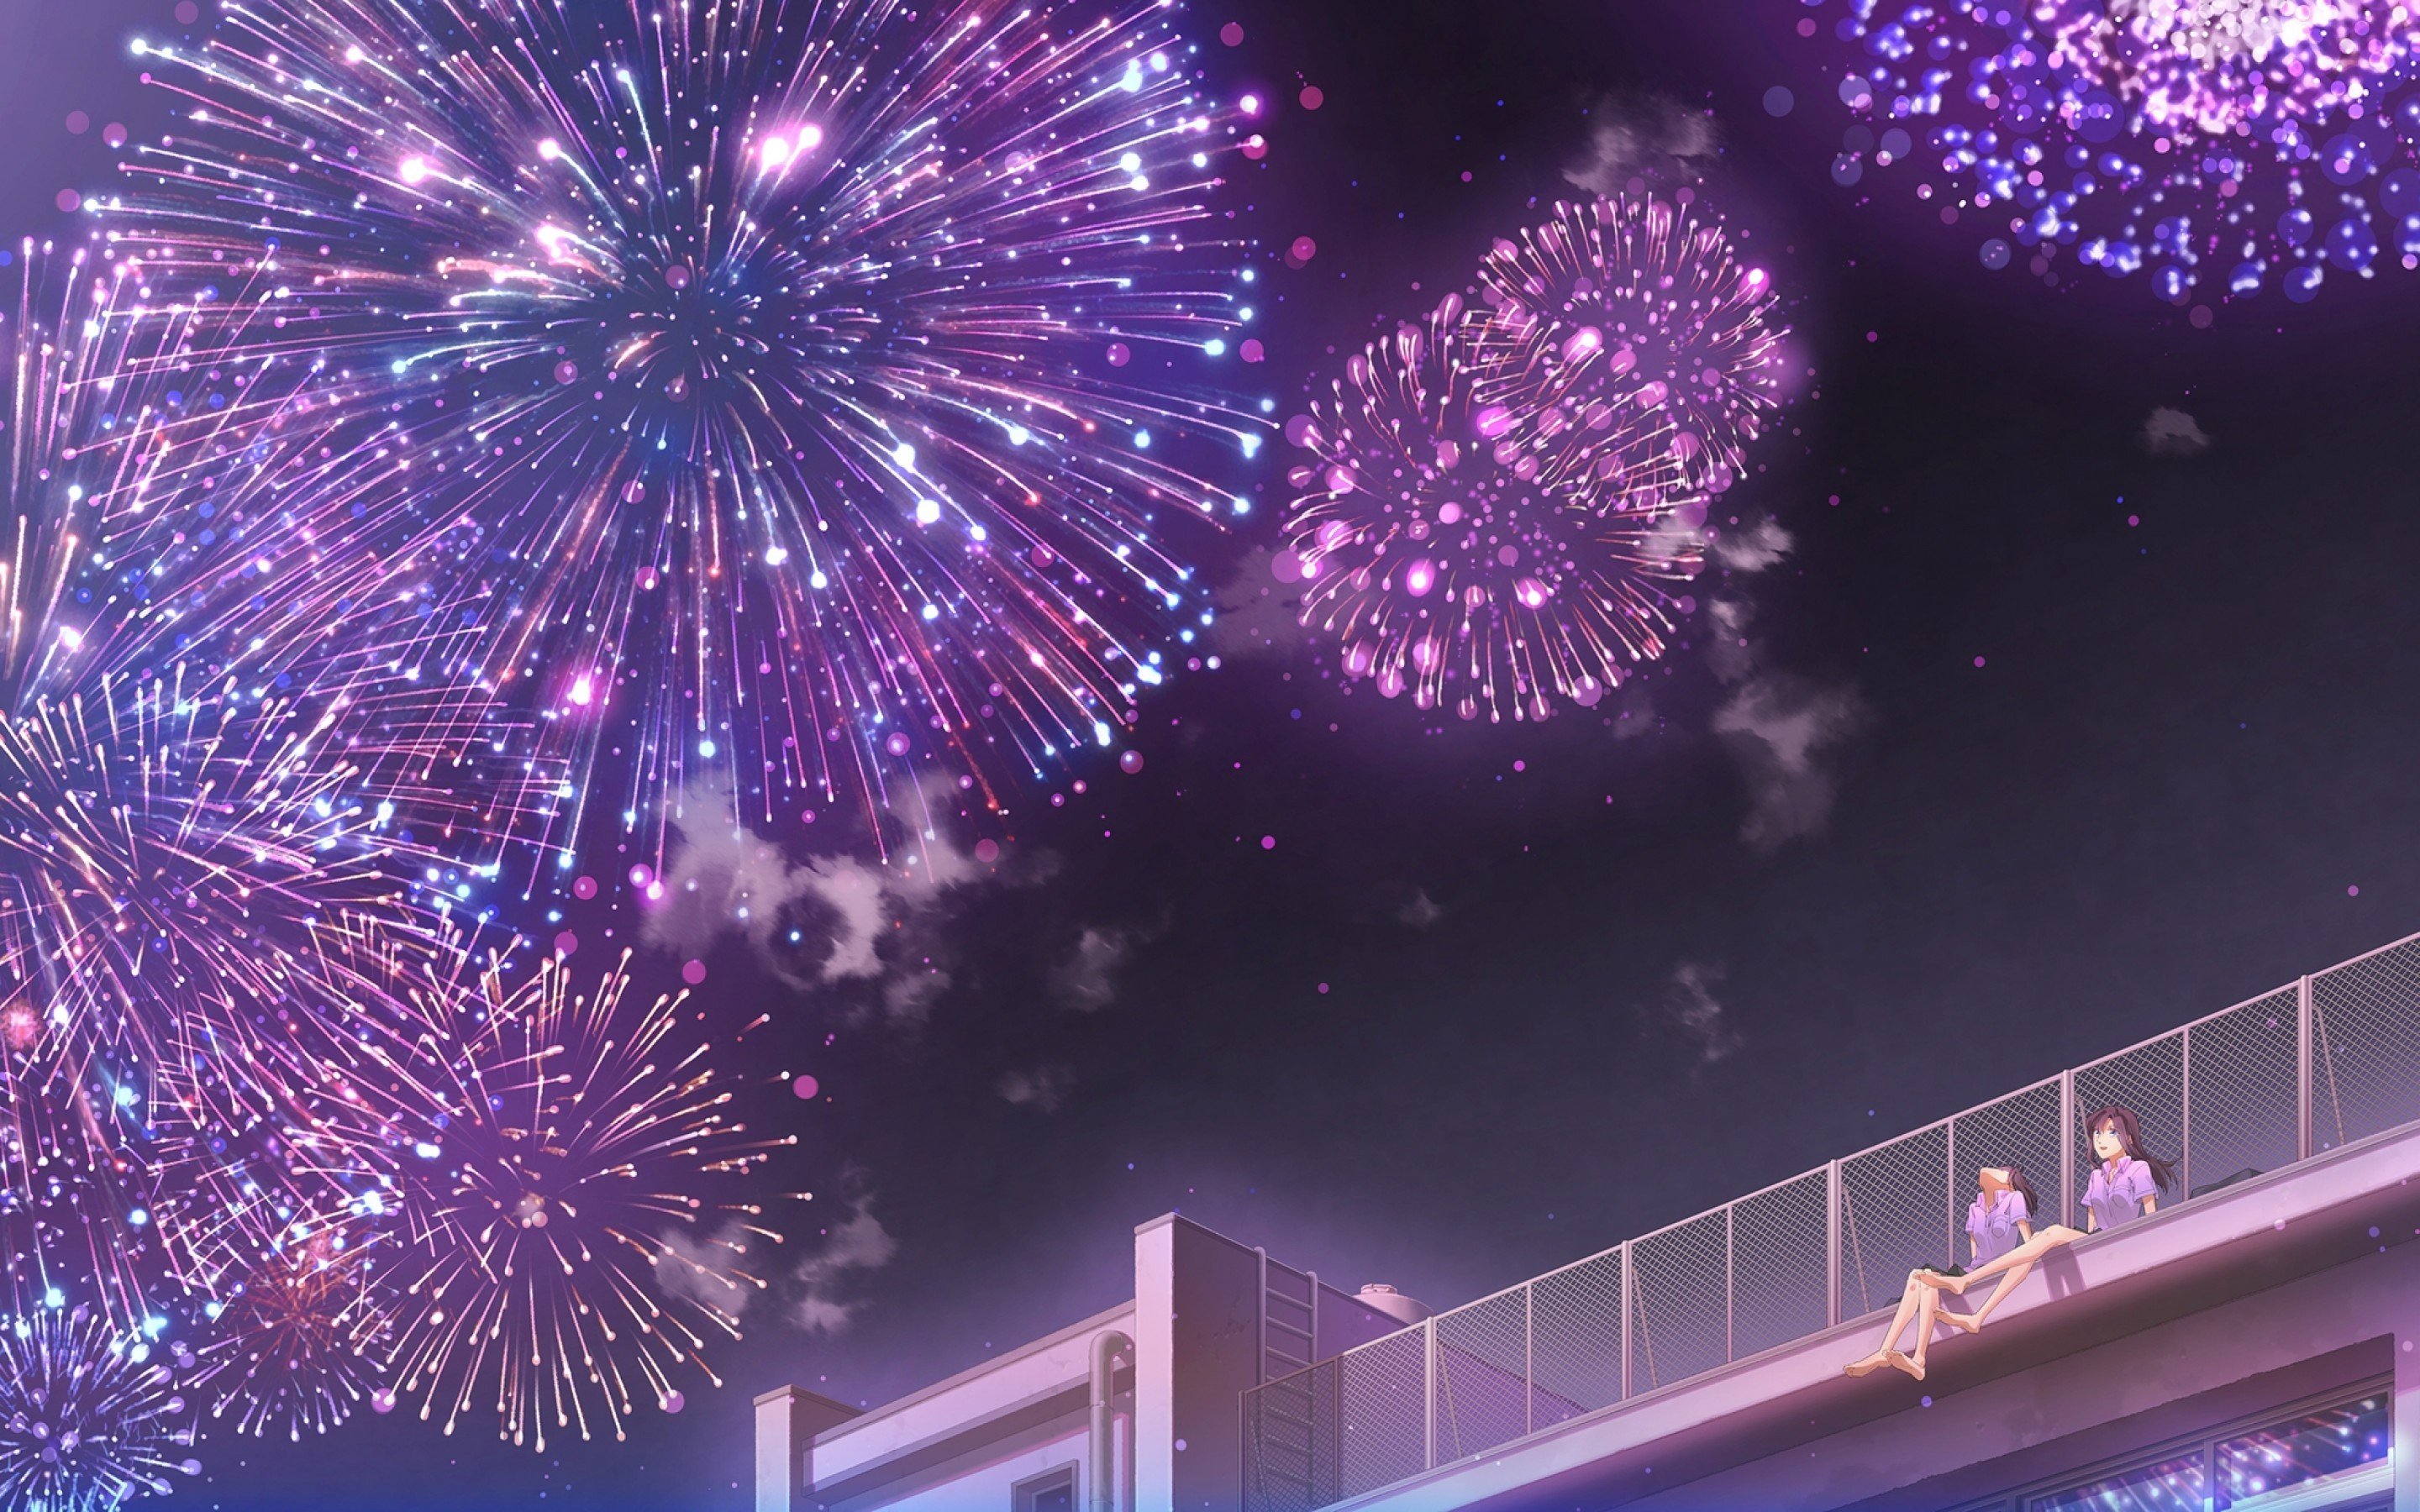 Download 2880x1800 Anime Girls, Fireworks, Festival, Night, Rooftop Wallpaper for MacBook Pro 15 inch